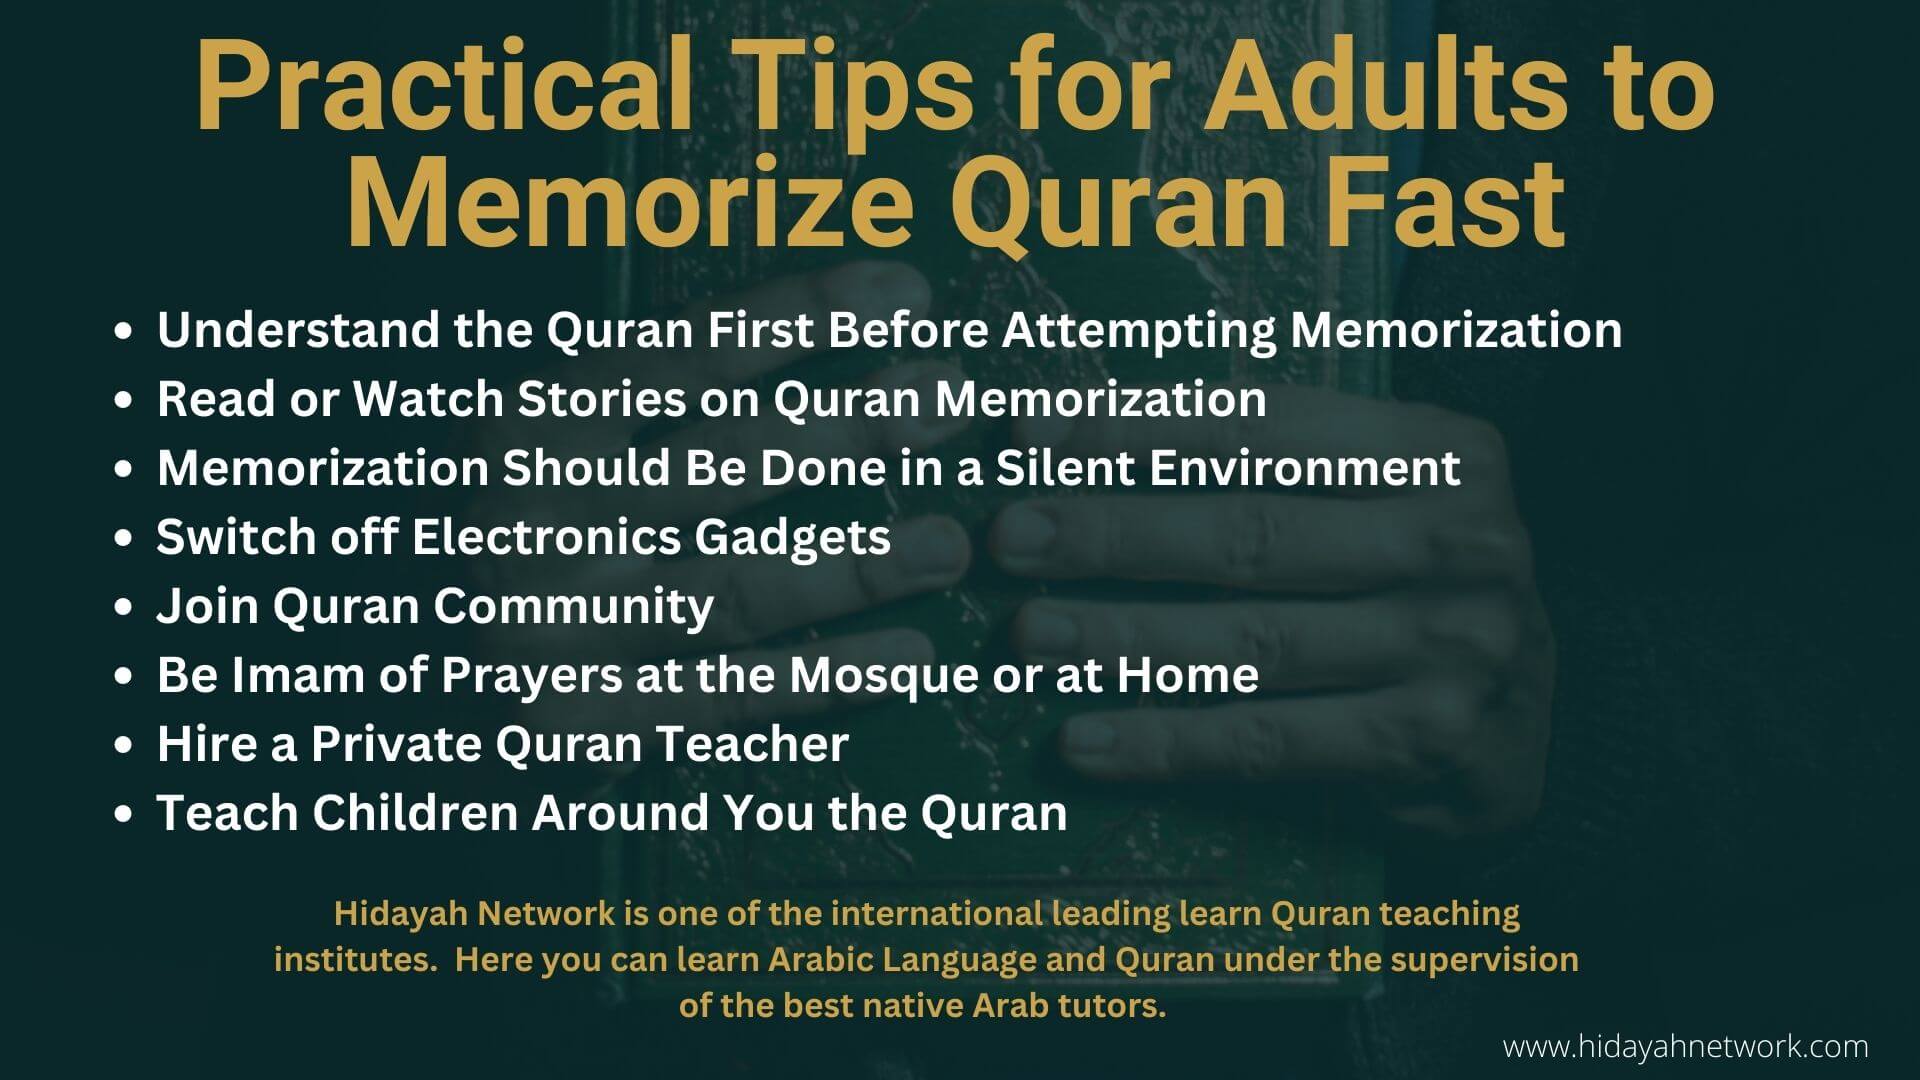 Adults to Memorize Quran Fast